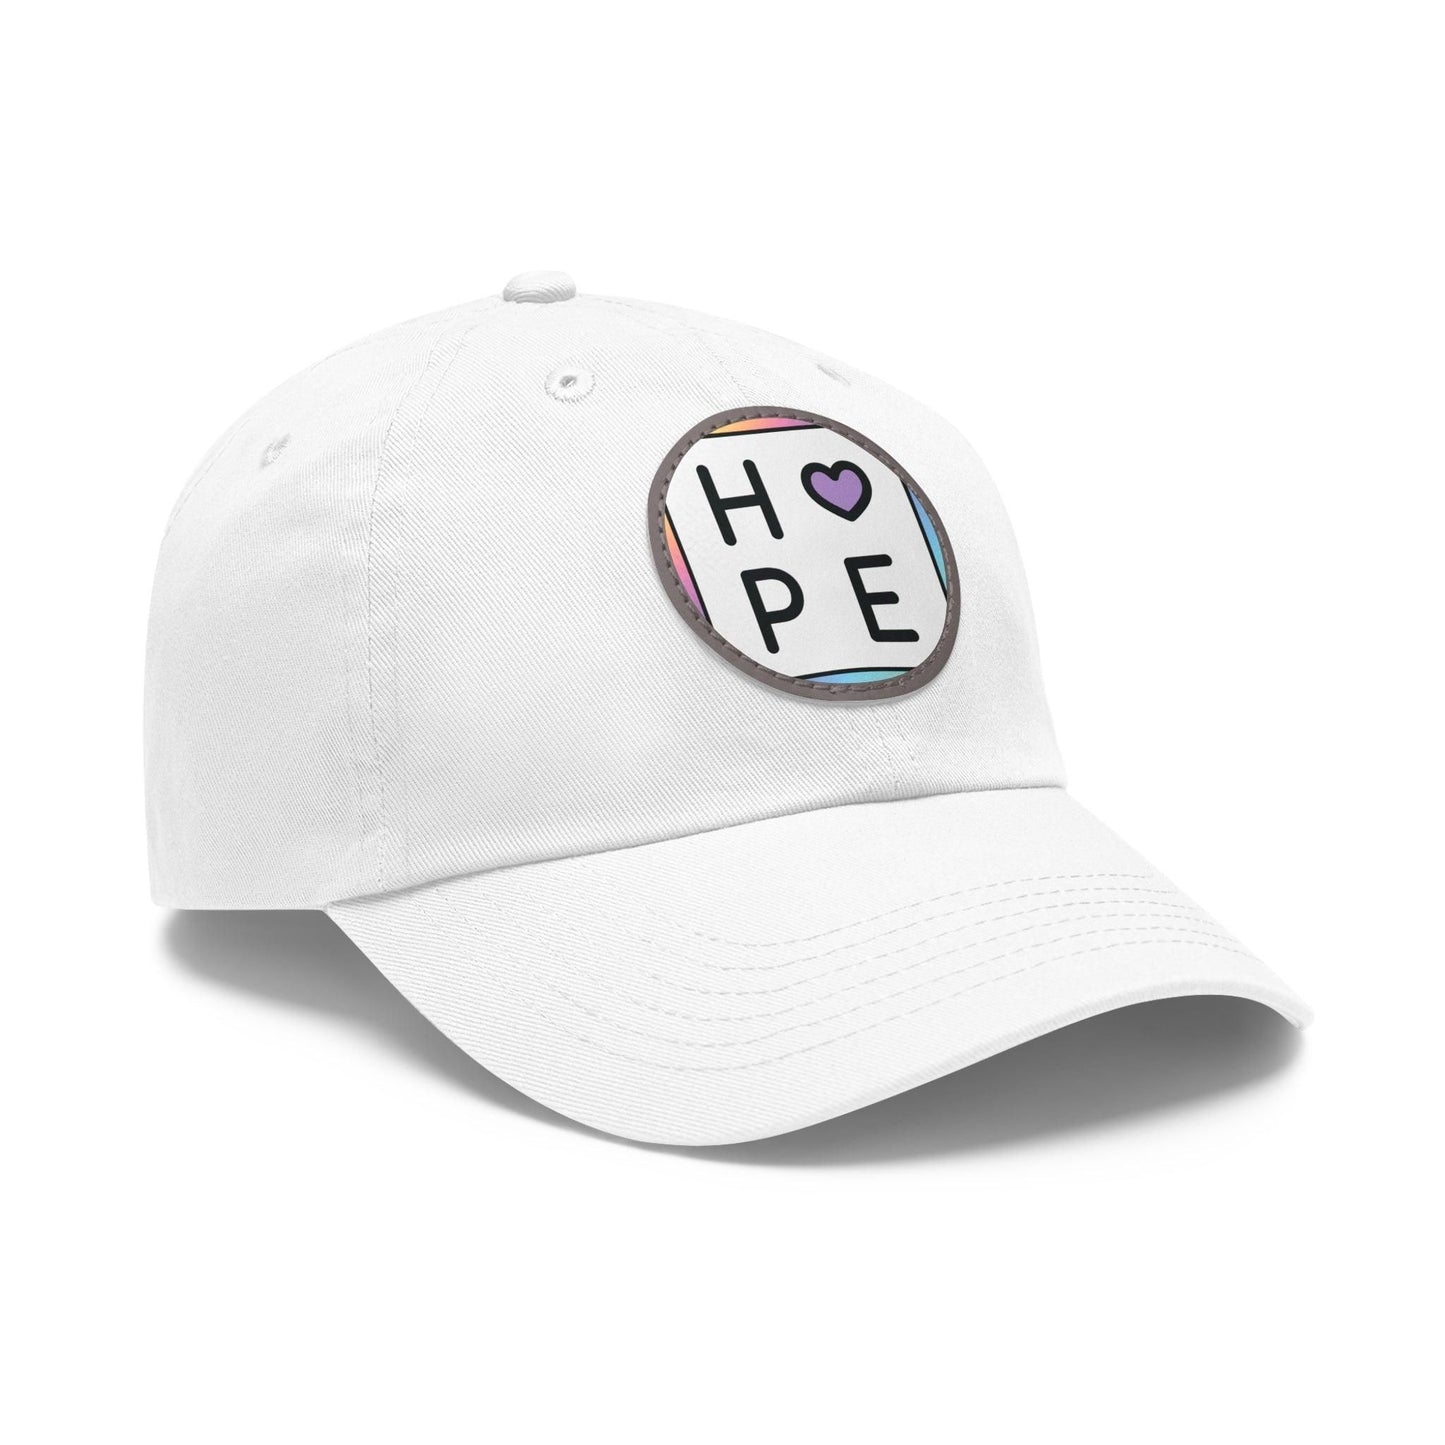 Hope Baseball Cap with Leather Patch Cap White / Grey patch Circle One size